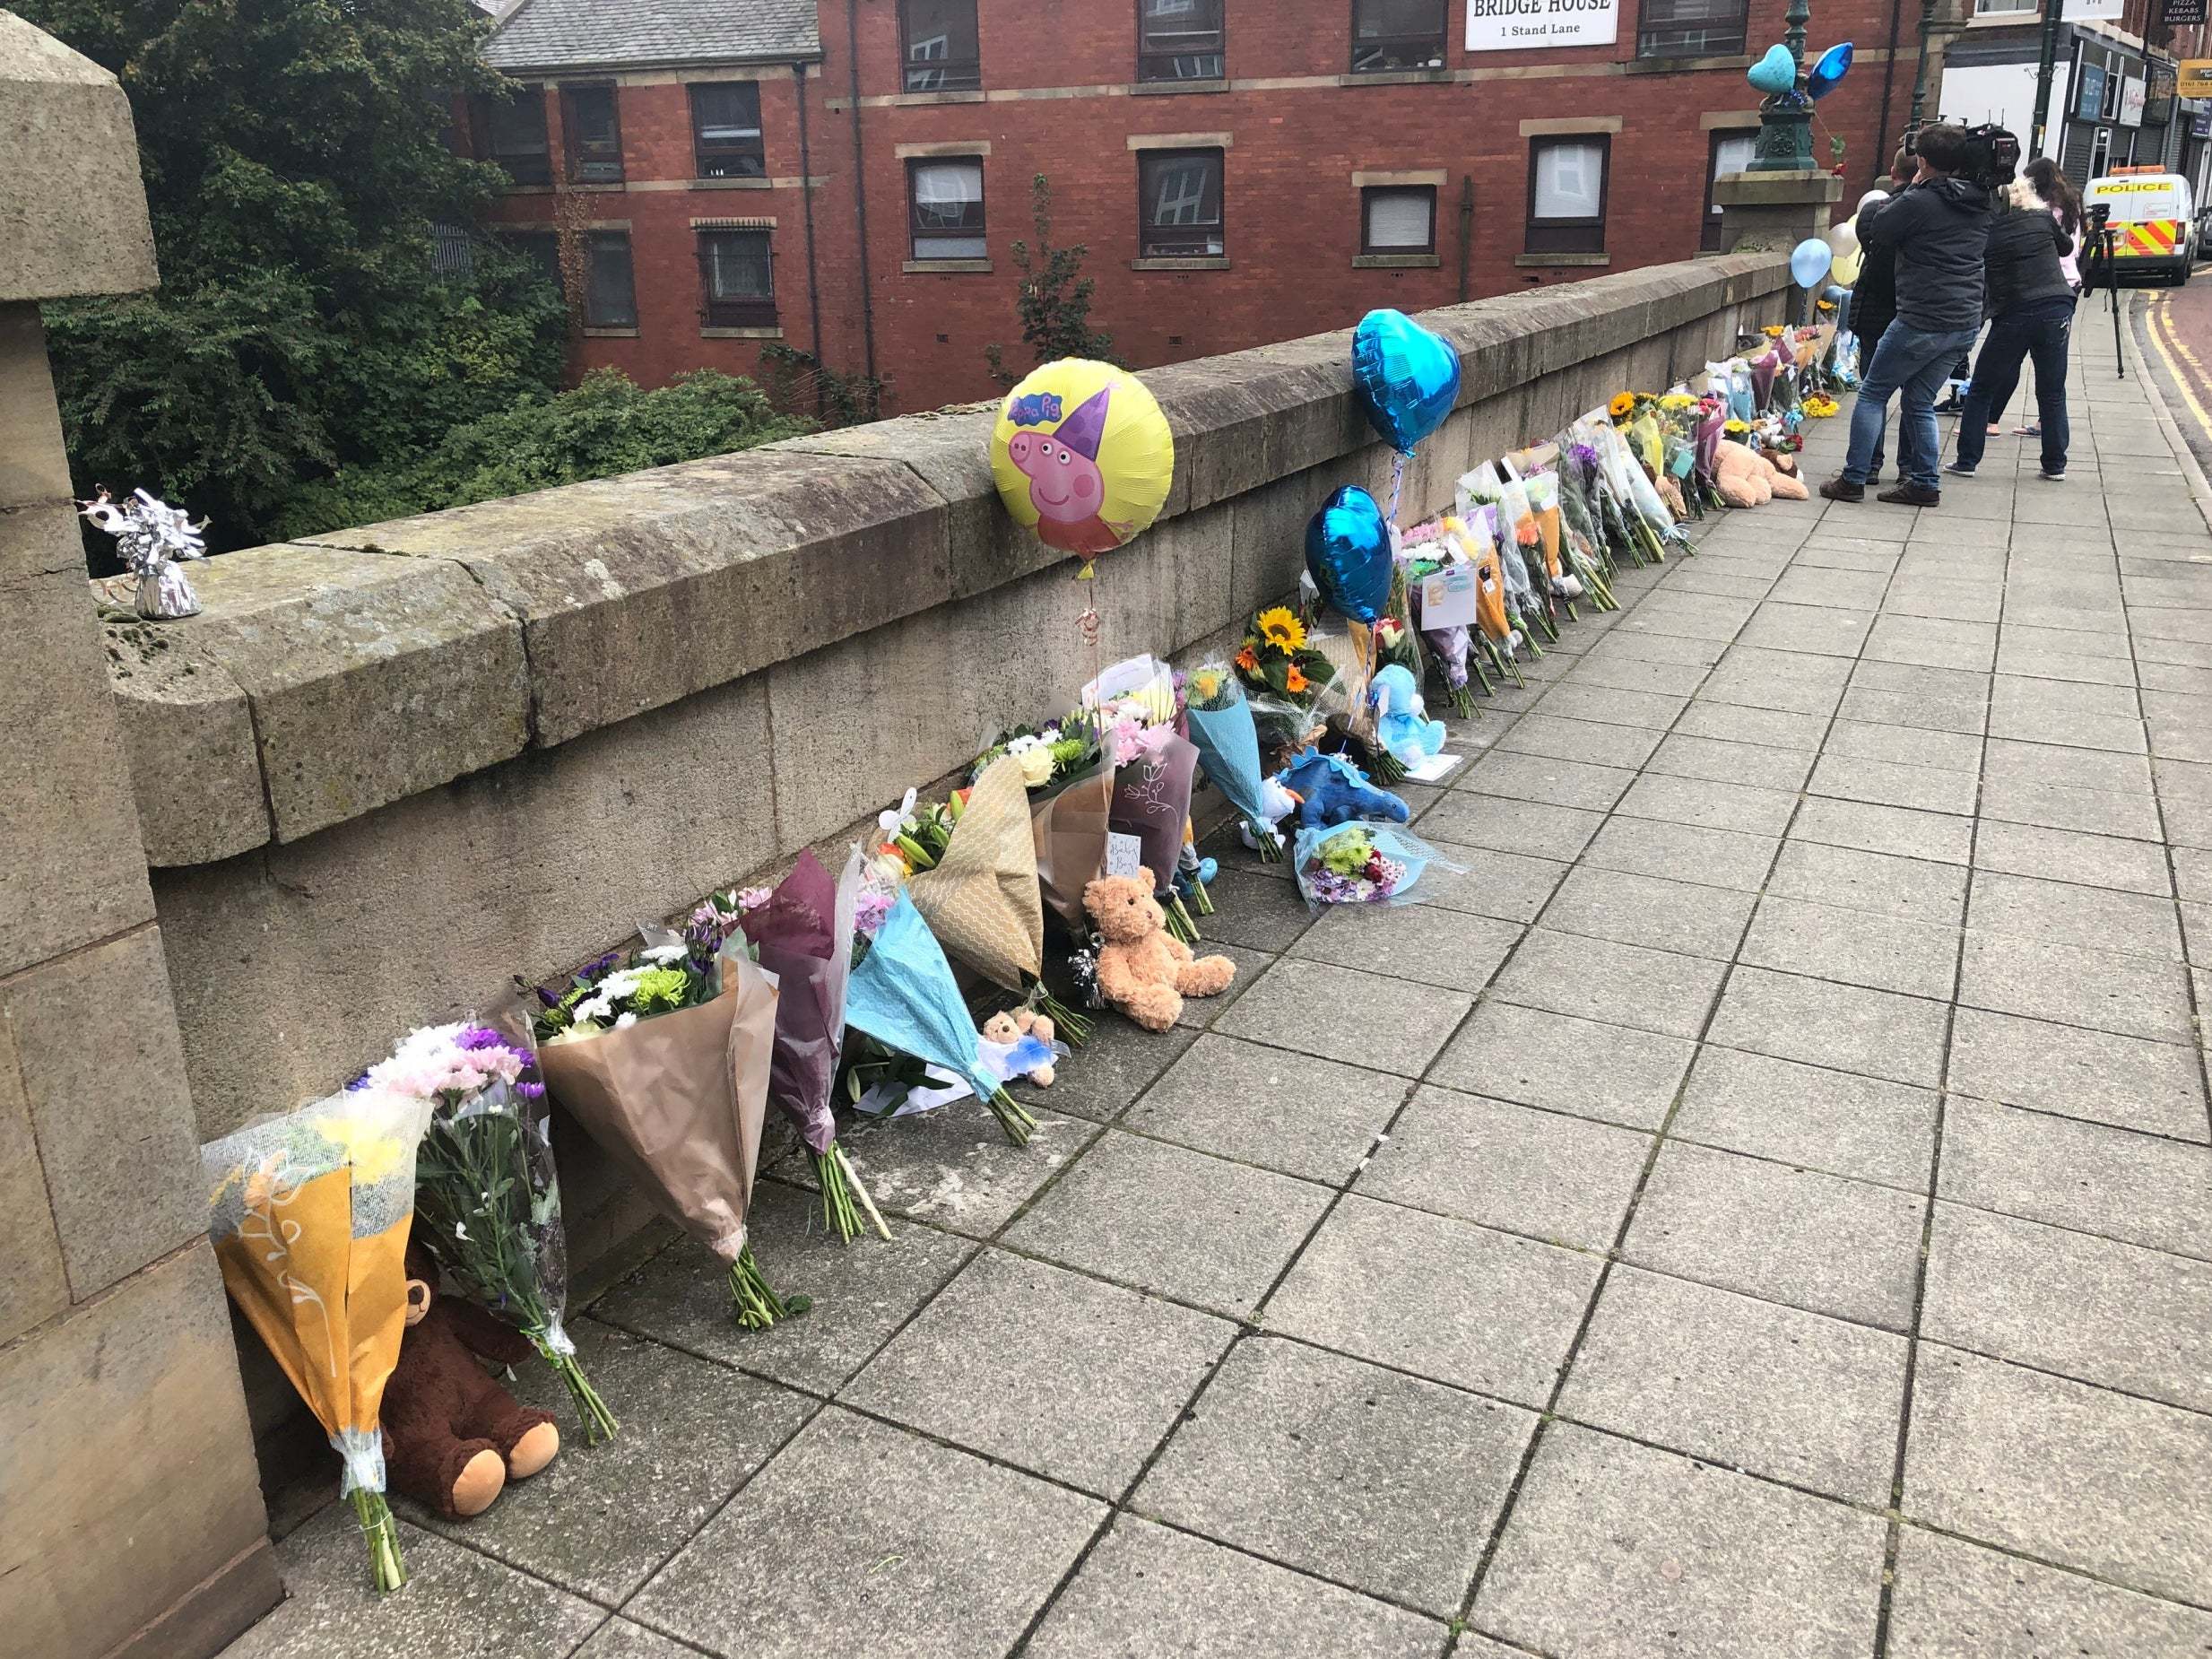 Flowers left on a bridge over the River Irwell in Radcliffe following the death of the baby boy